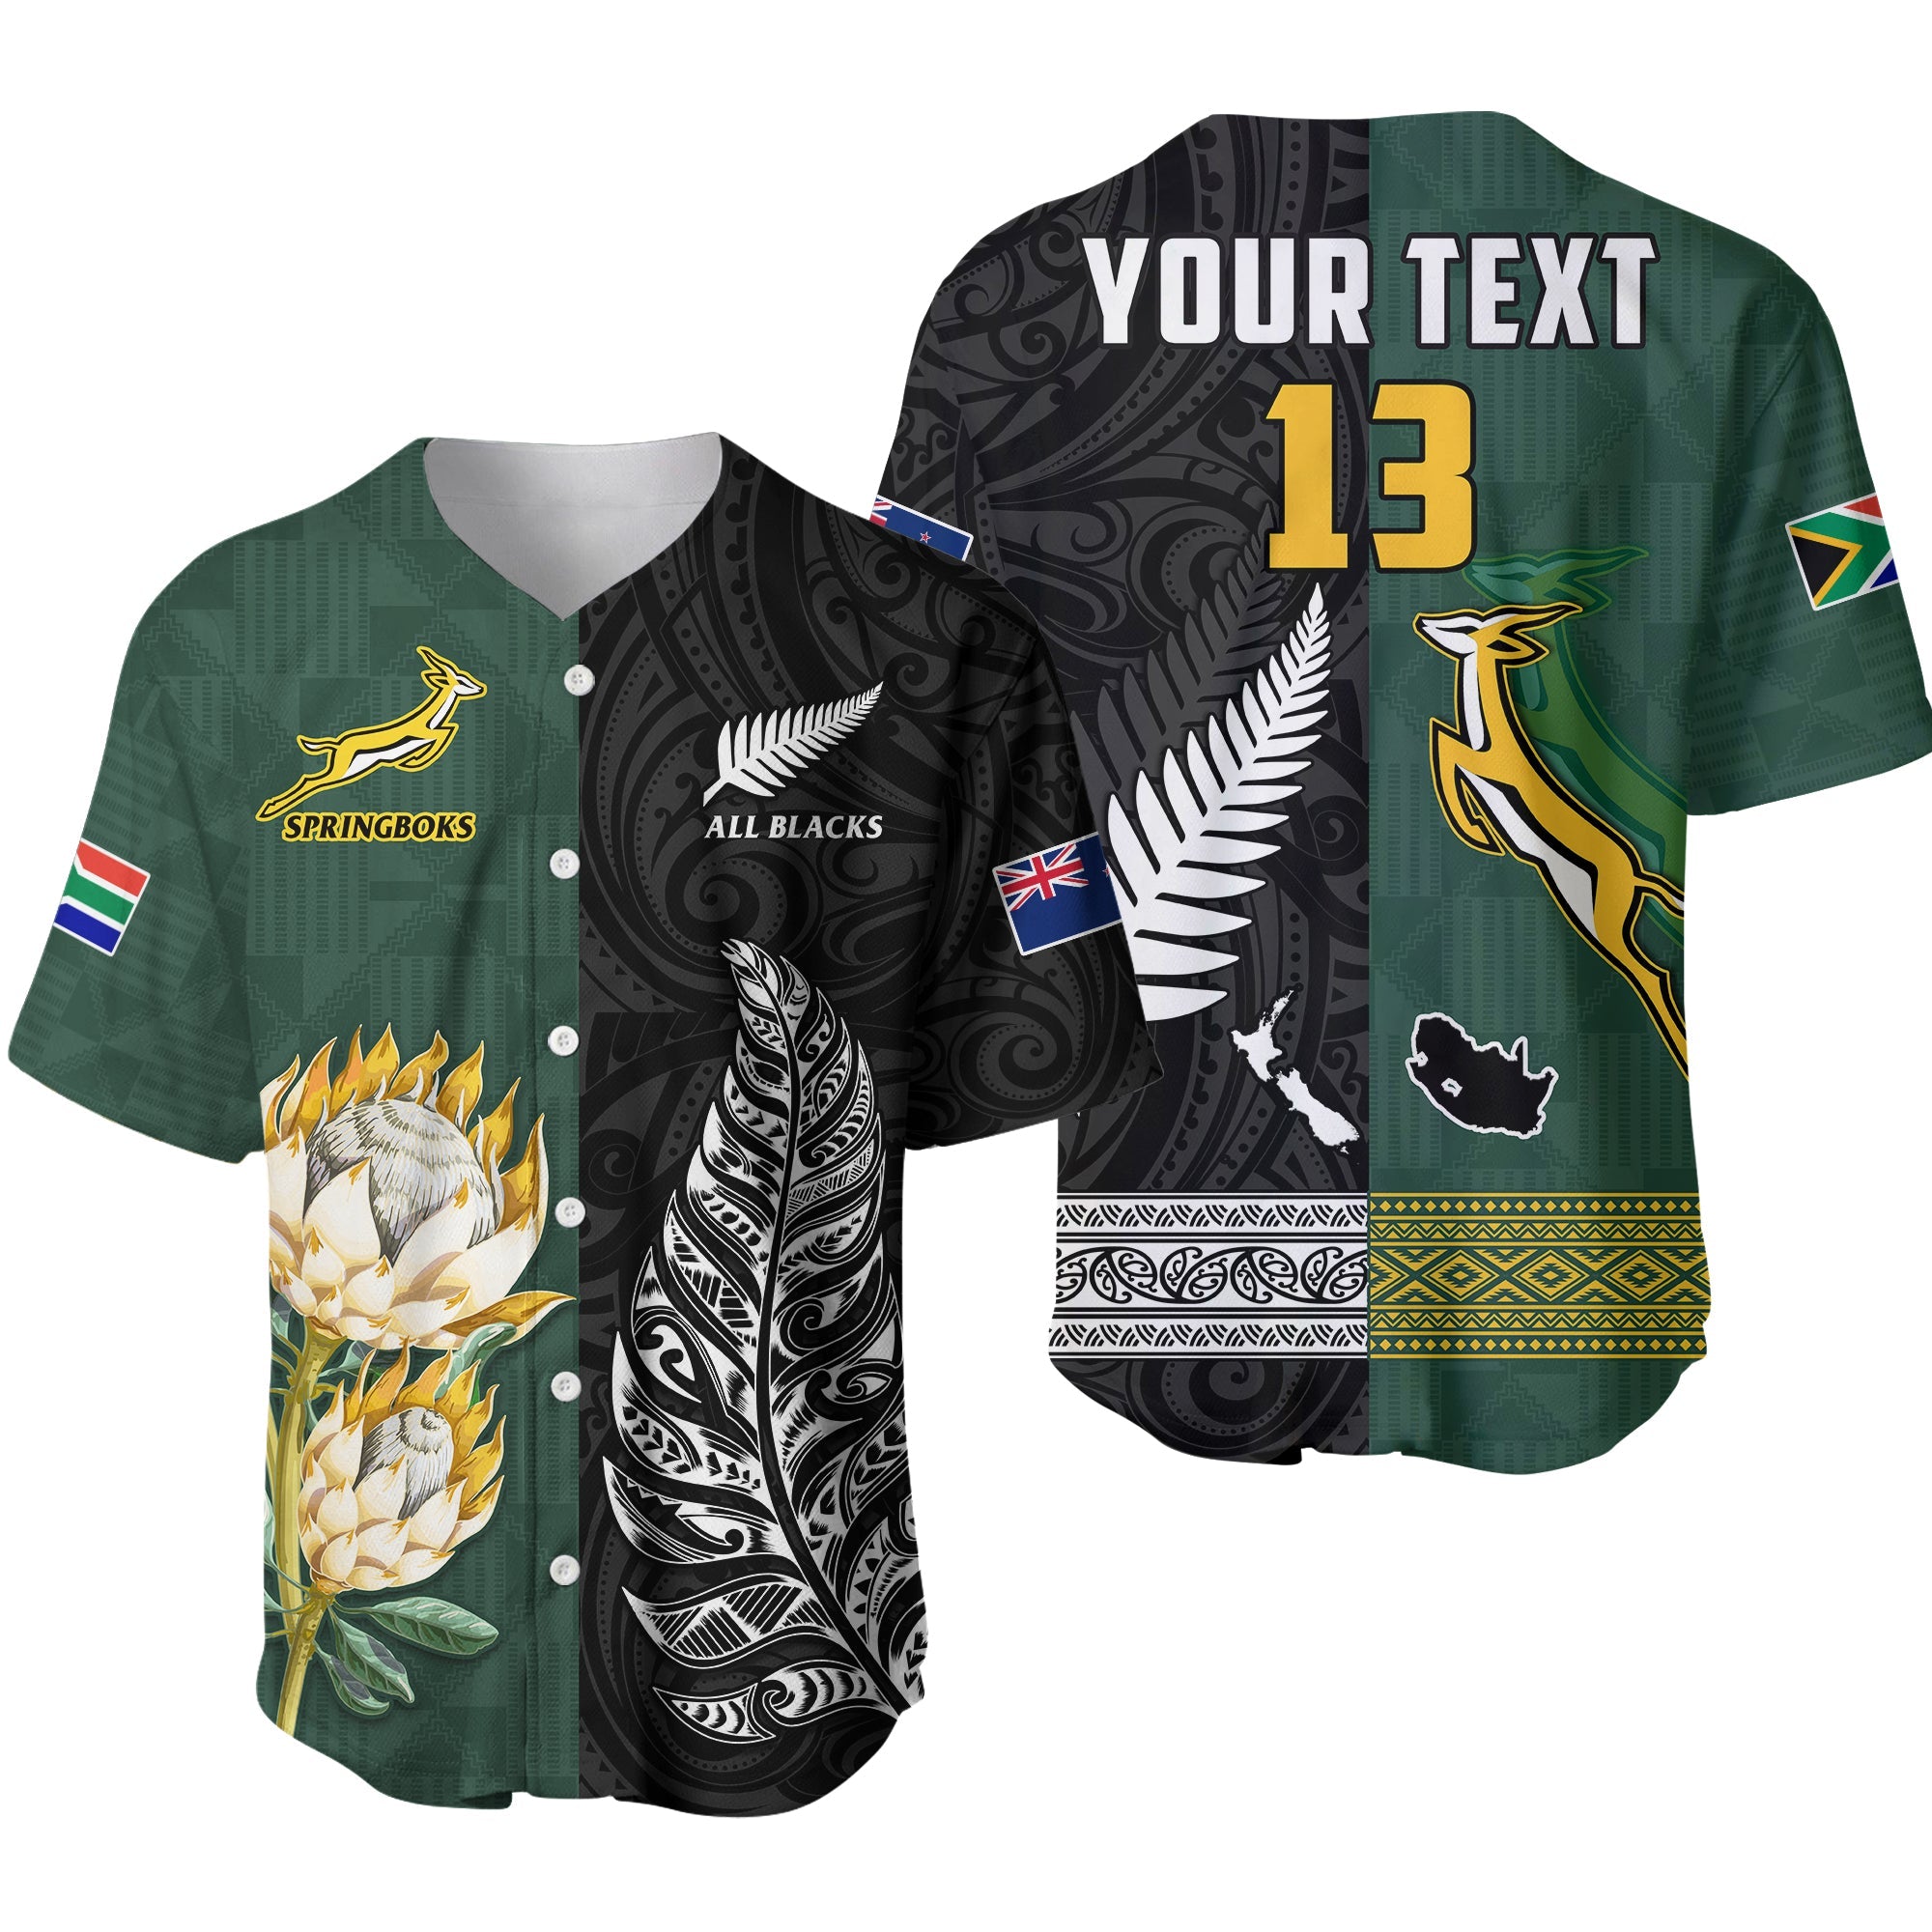 (Custom Text and Number) South Africa Protea and New Zealand Fern Baseball Jersey Rugby Go Springboks vs All Black LT13 Art - Polynesian Pride